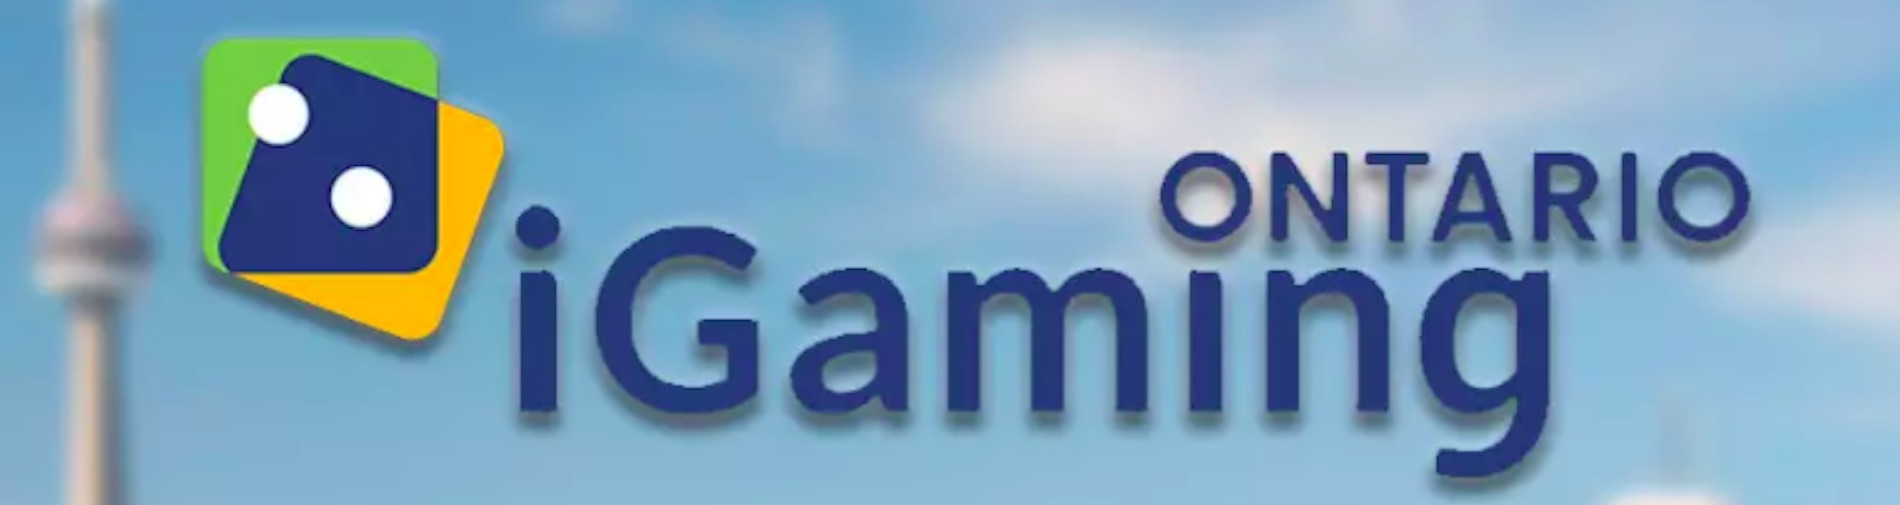 When Will The Ontario iGaming Market Launch?